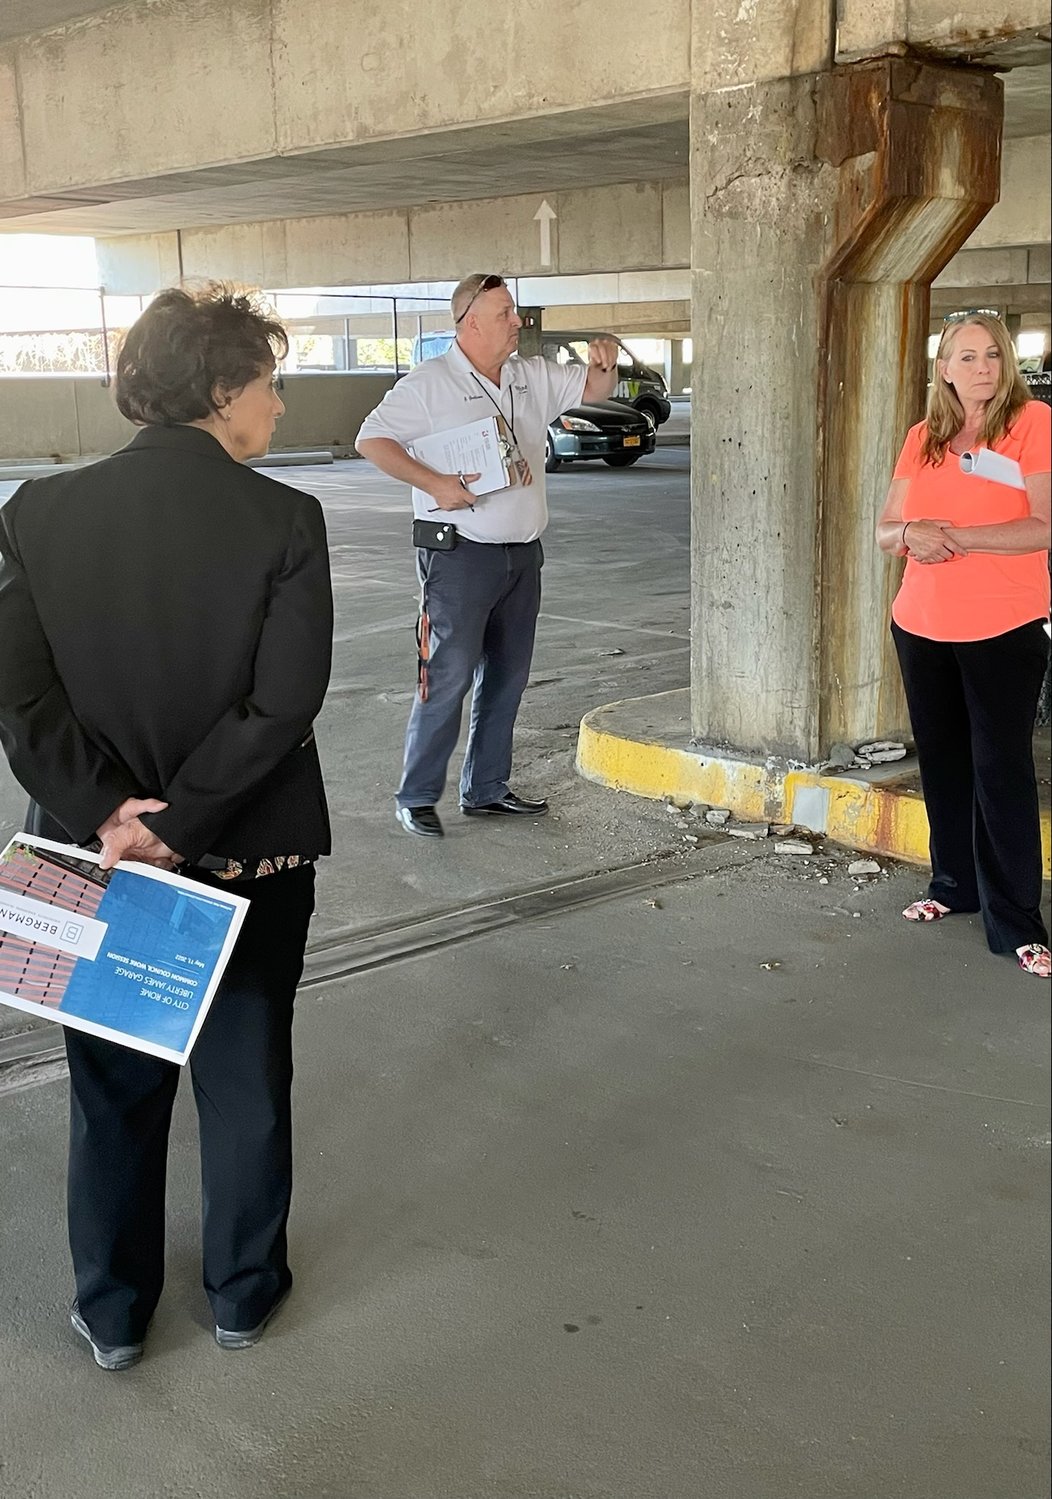 Rome City Engineer II Joseph Guiliano shows Common Council members and city officials the deteriorating condition of a support beam inside the Liberty James Garage Wednesday. Also pictured are Fourth Ward Councilor Ramona L. Smith, left, and Third Ward Councilor Kimberly Rogers. (Sentinel photo by Nicole A. Hawley)